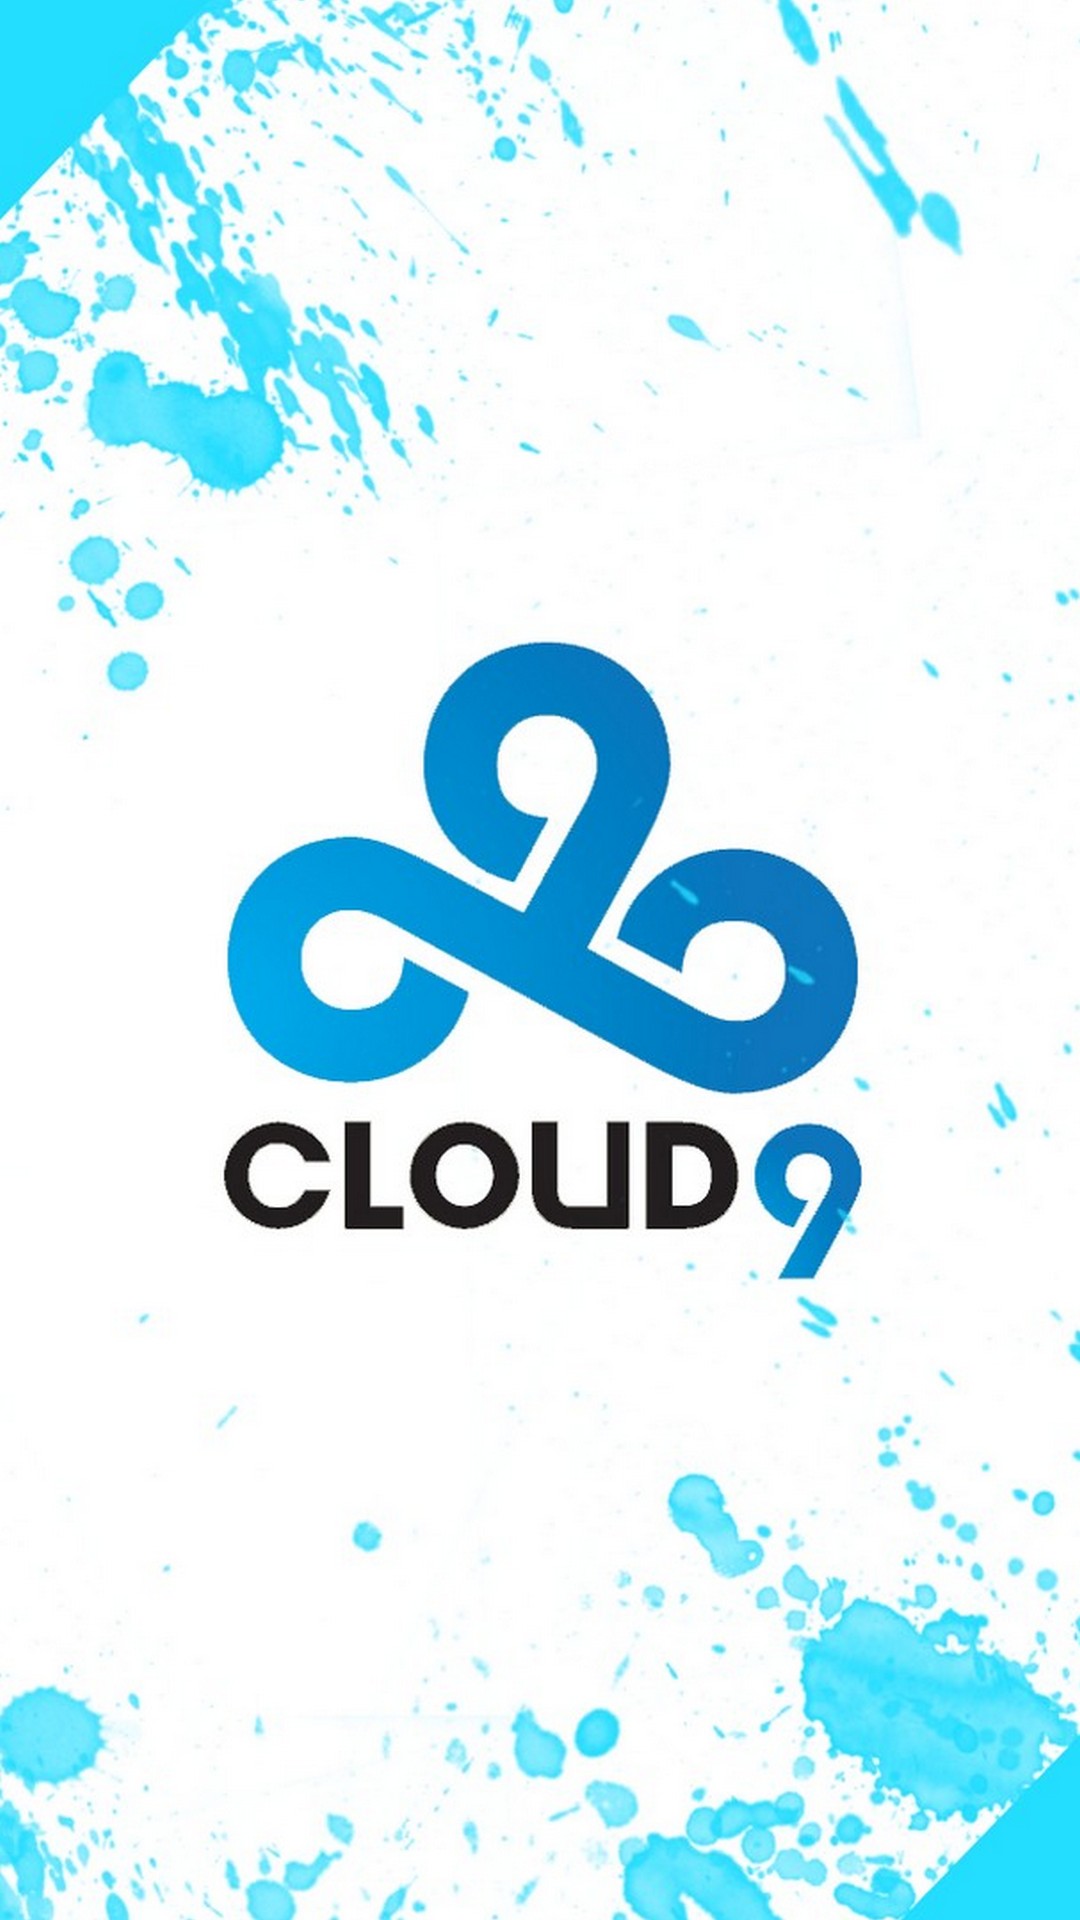 Cloud9 Android Wallpaper with HD resolution 1080x1920